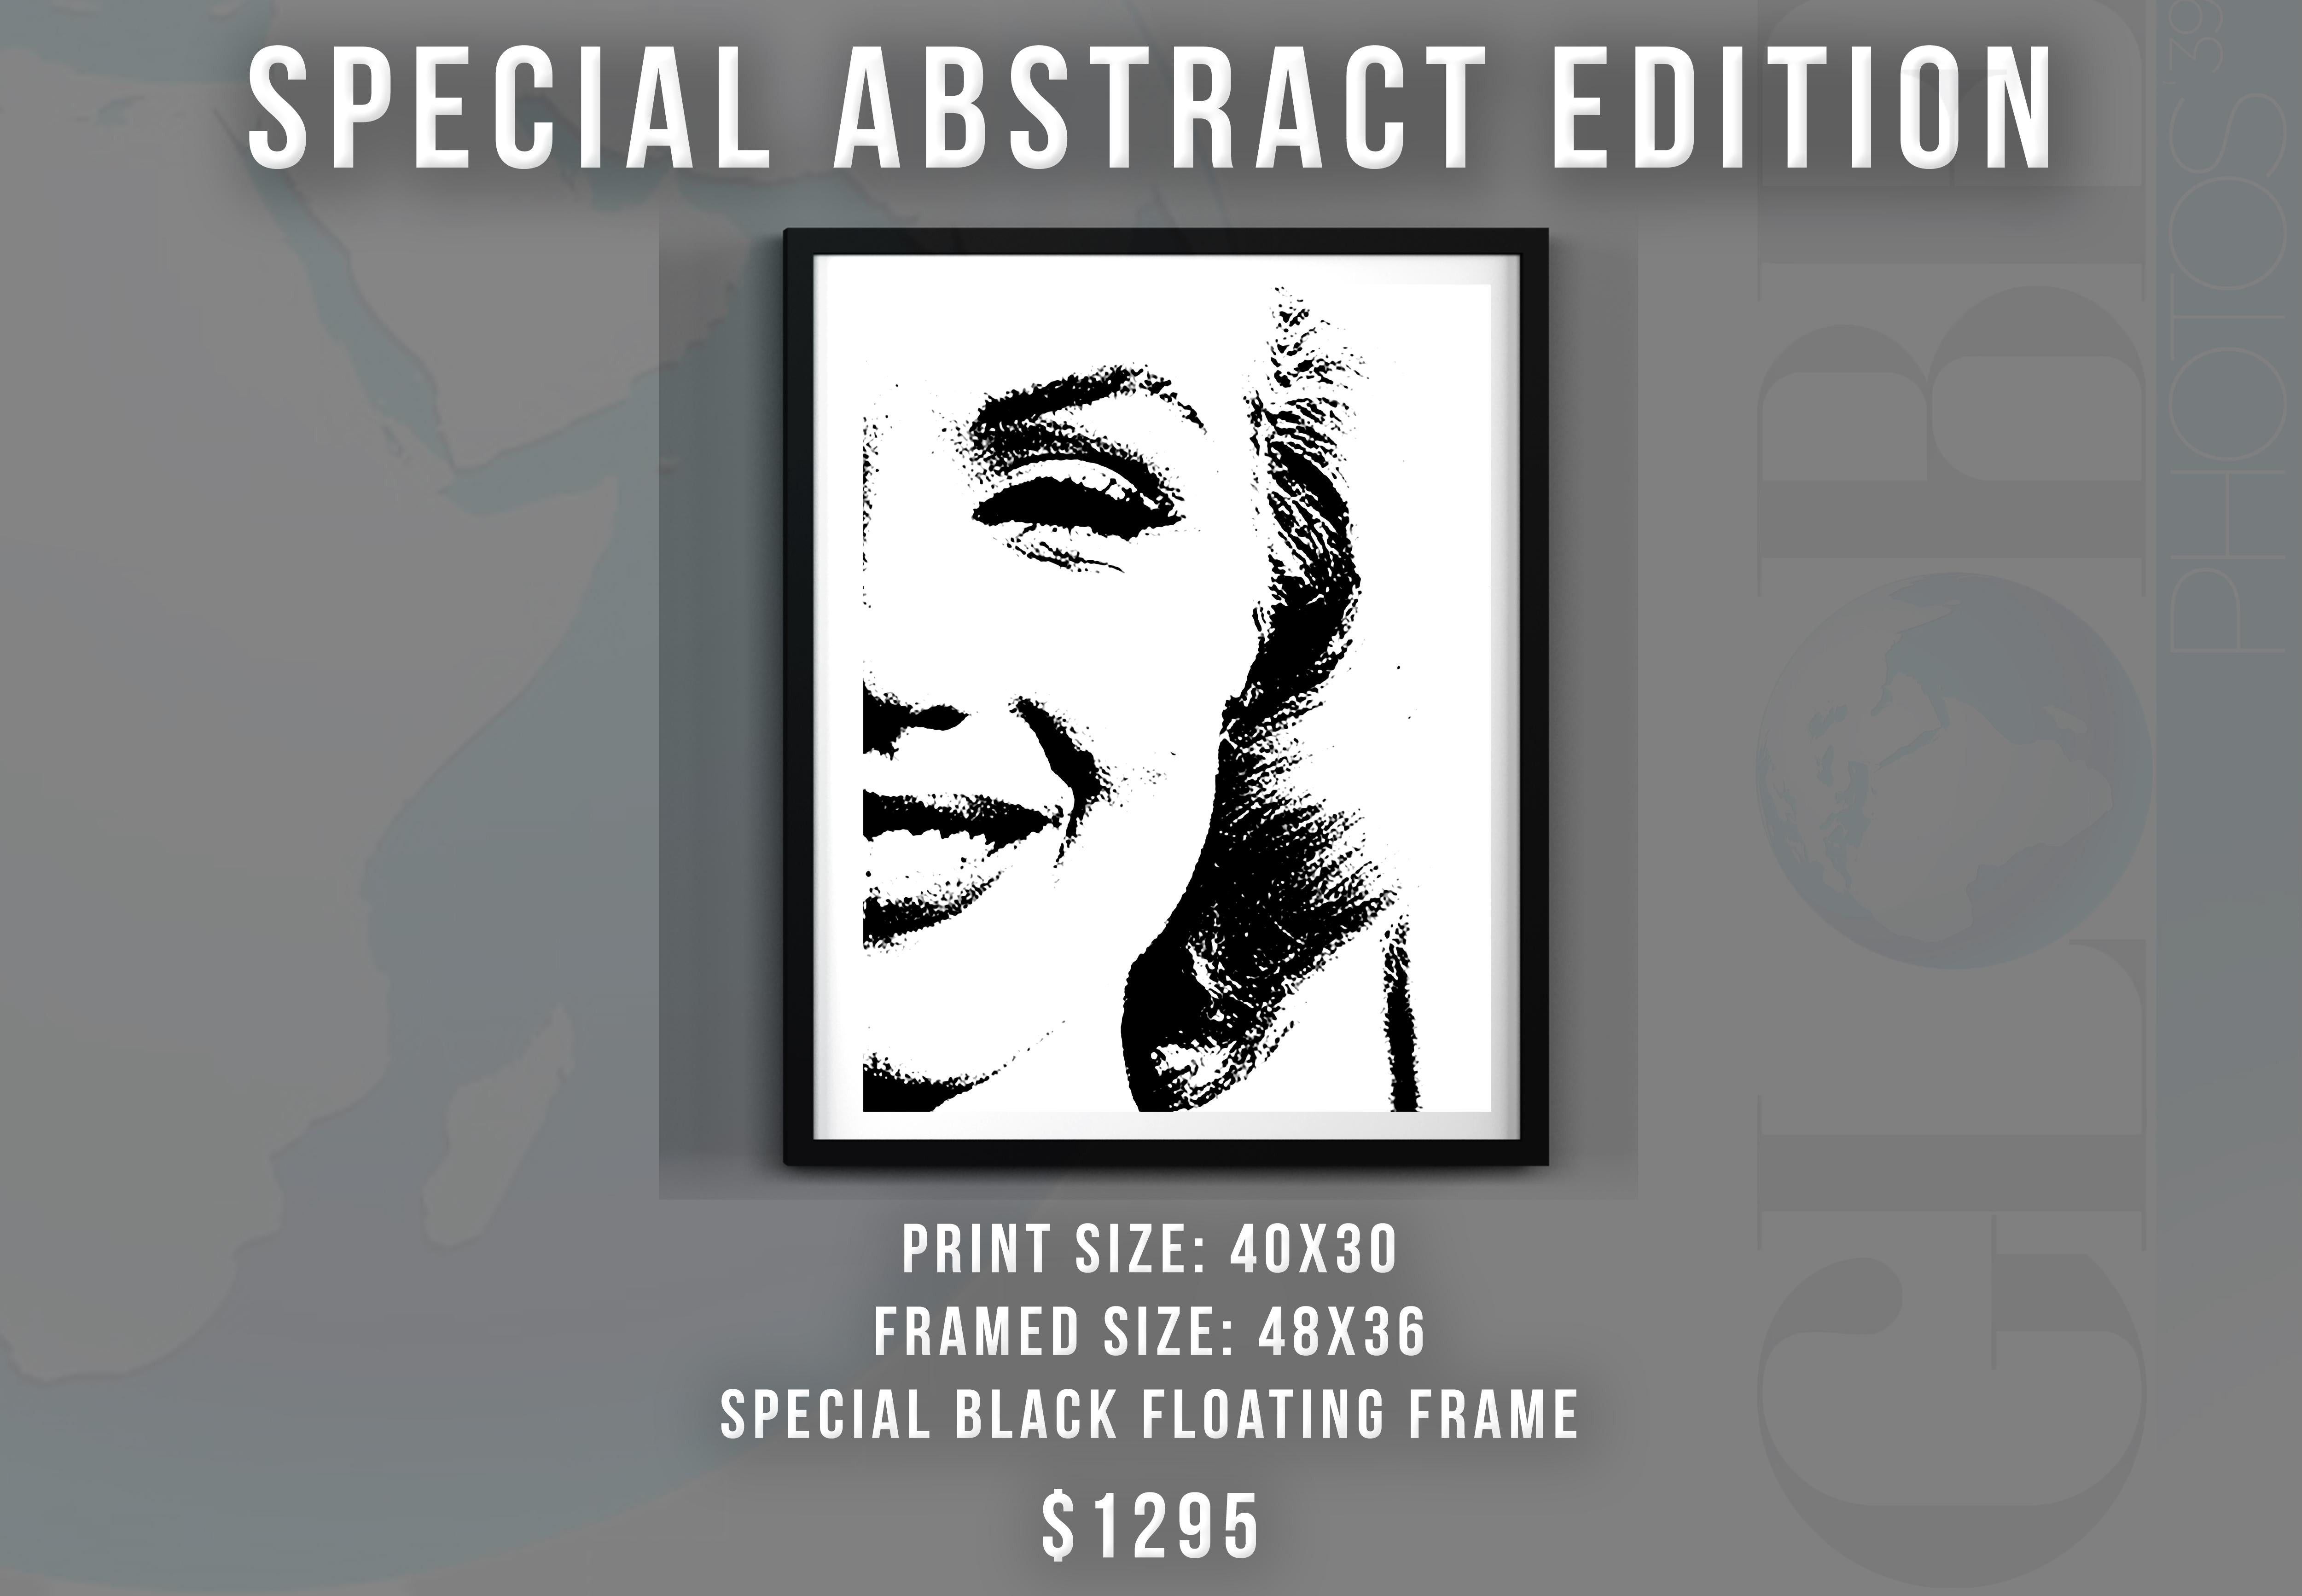 Marilyn Monroe Special Abstract Edition Framed Art Print - Photograph by Unknown